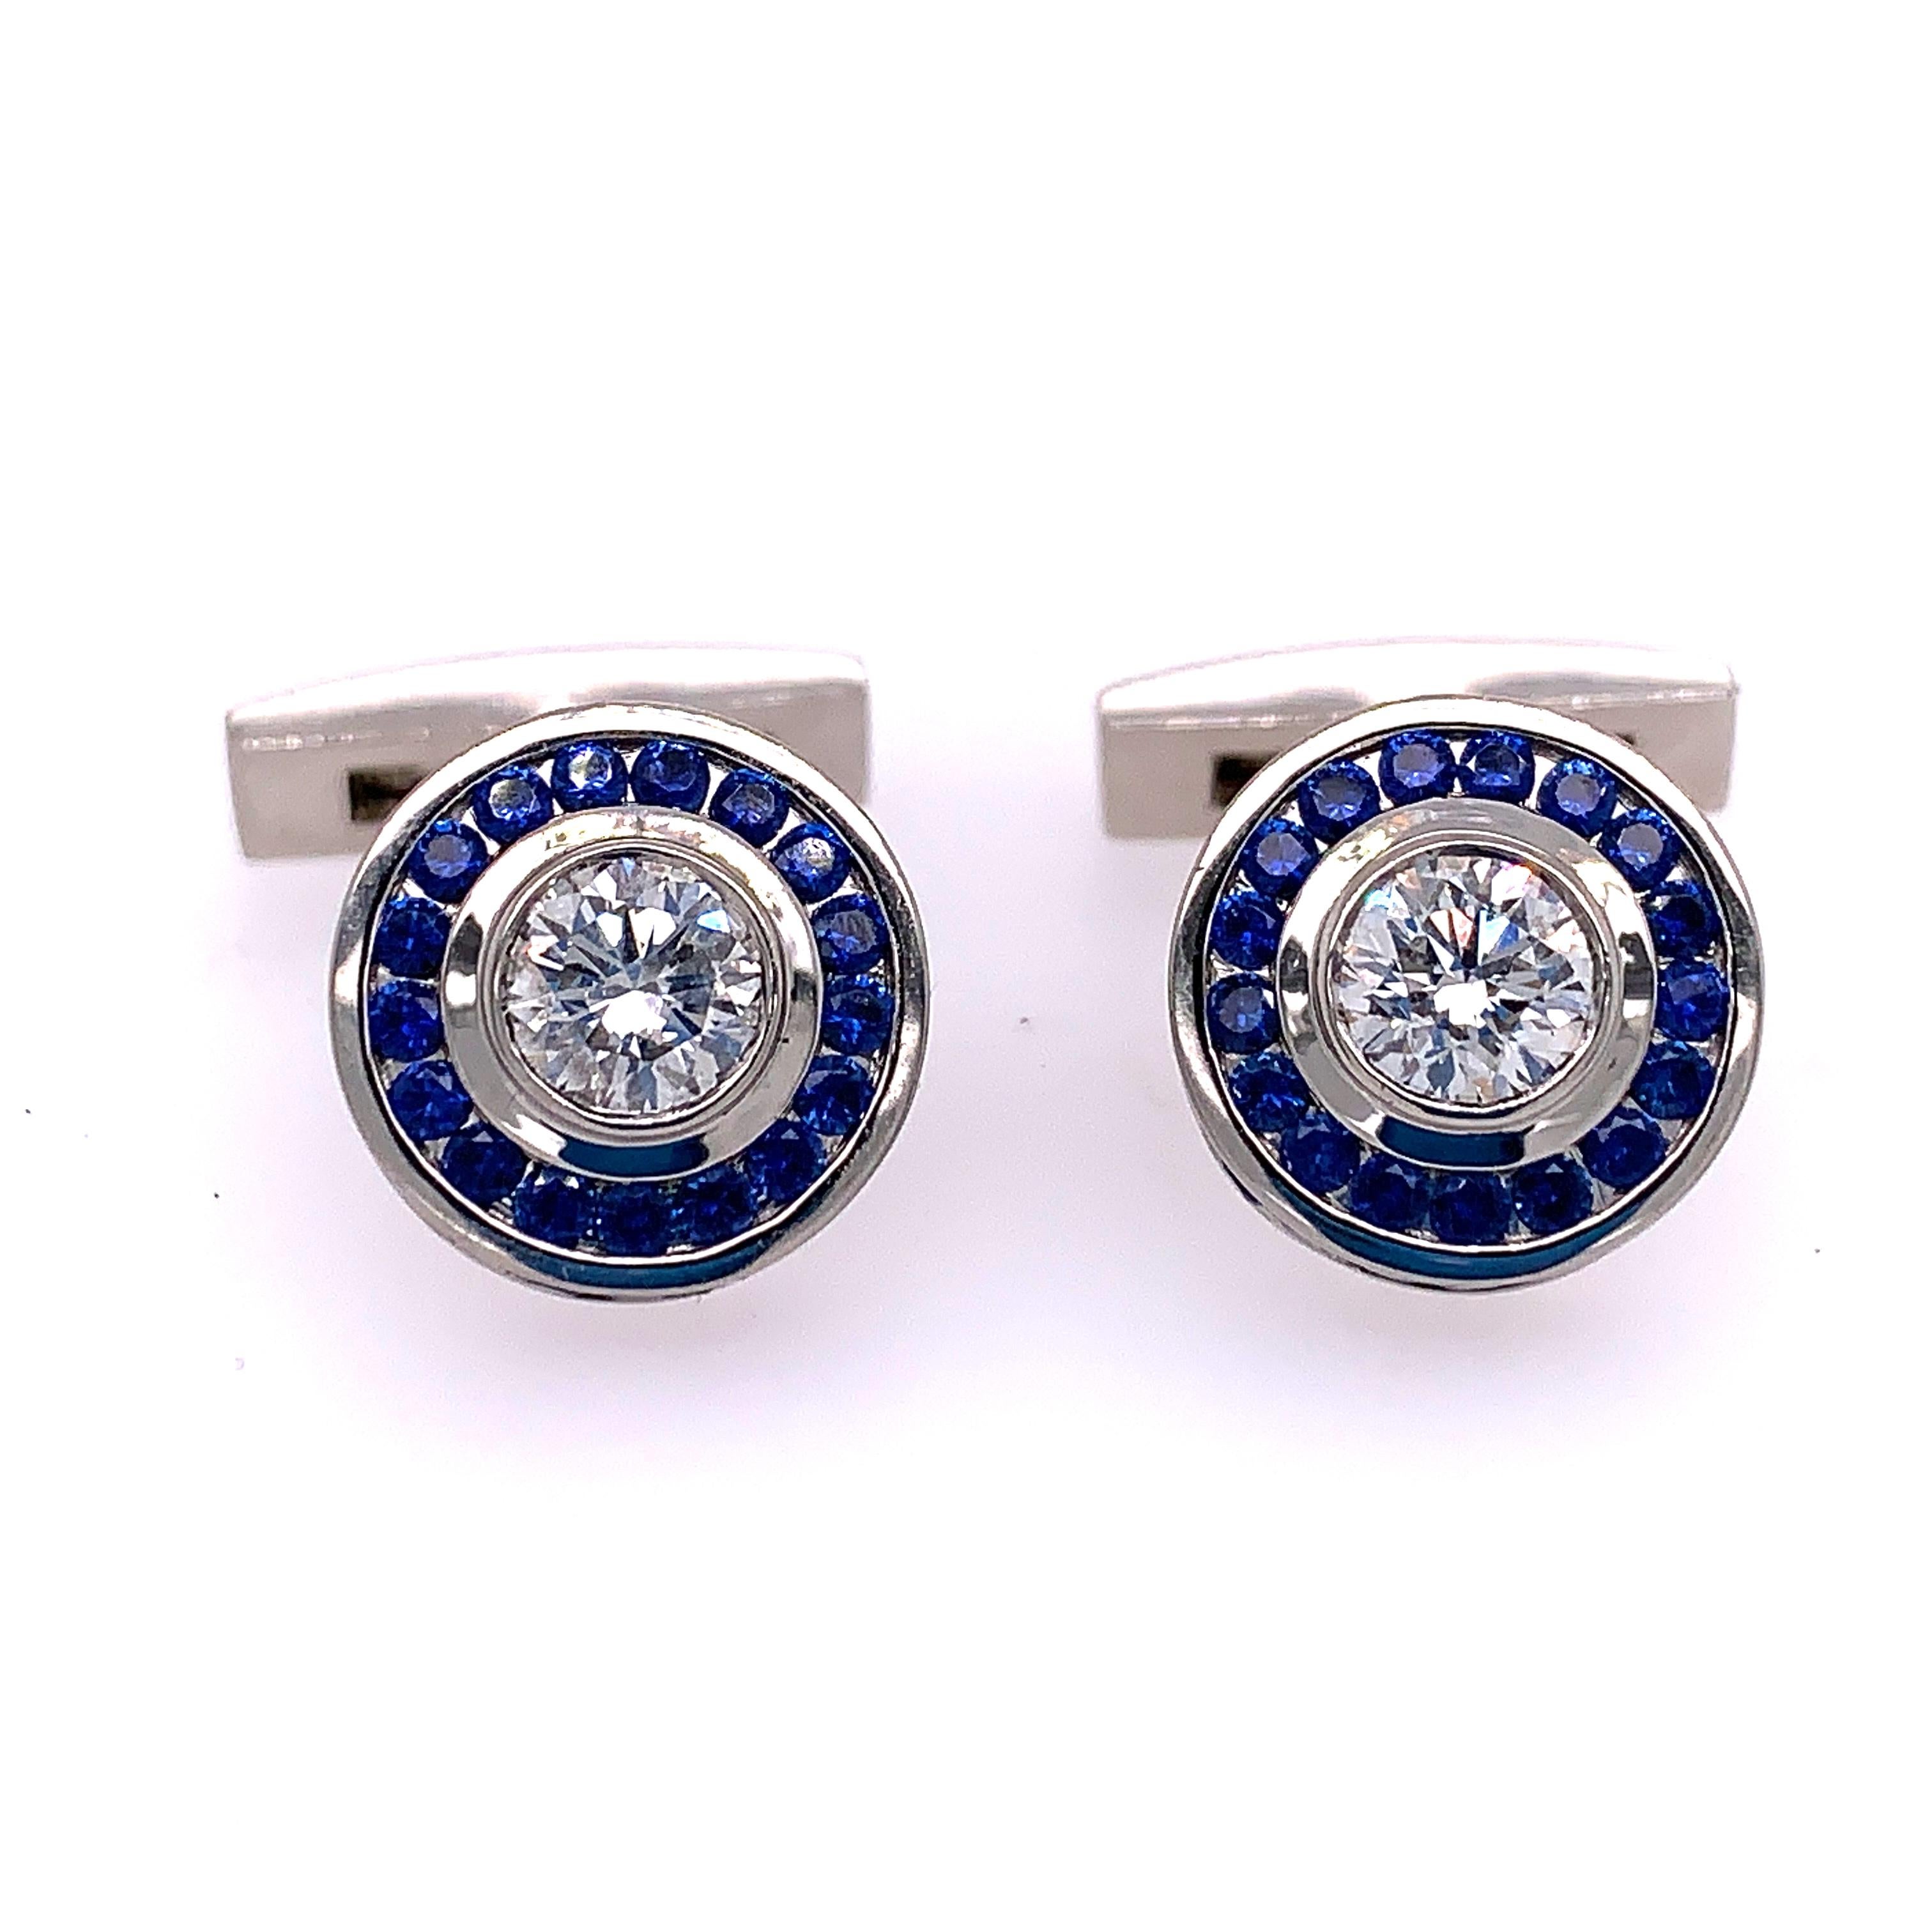 These striking cufflinks feature two GIA certified Round Brilliant cut diamonds with a G color grade and a VS1 Clarity. They weigh .72 and .71 carats each. 

Framing these center diamonds are seventy-six round Sapphires weighing a total of 1.94